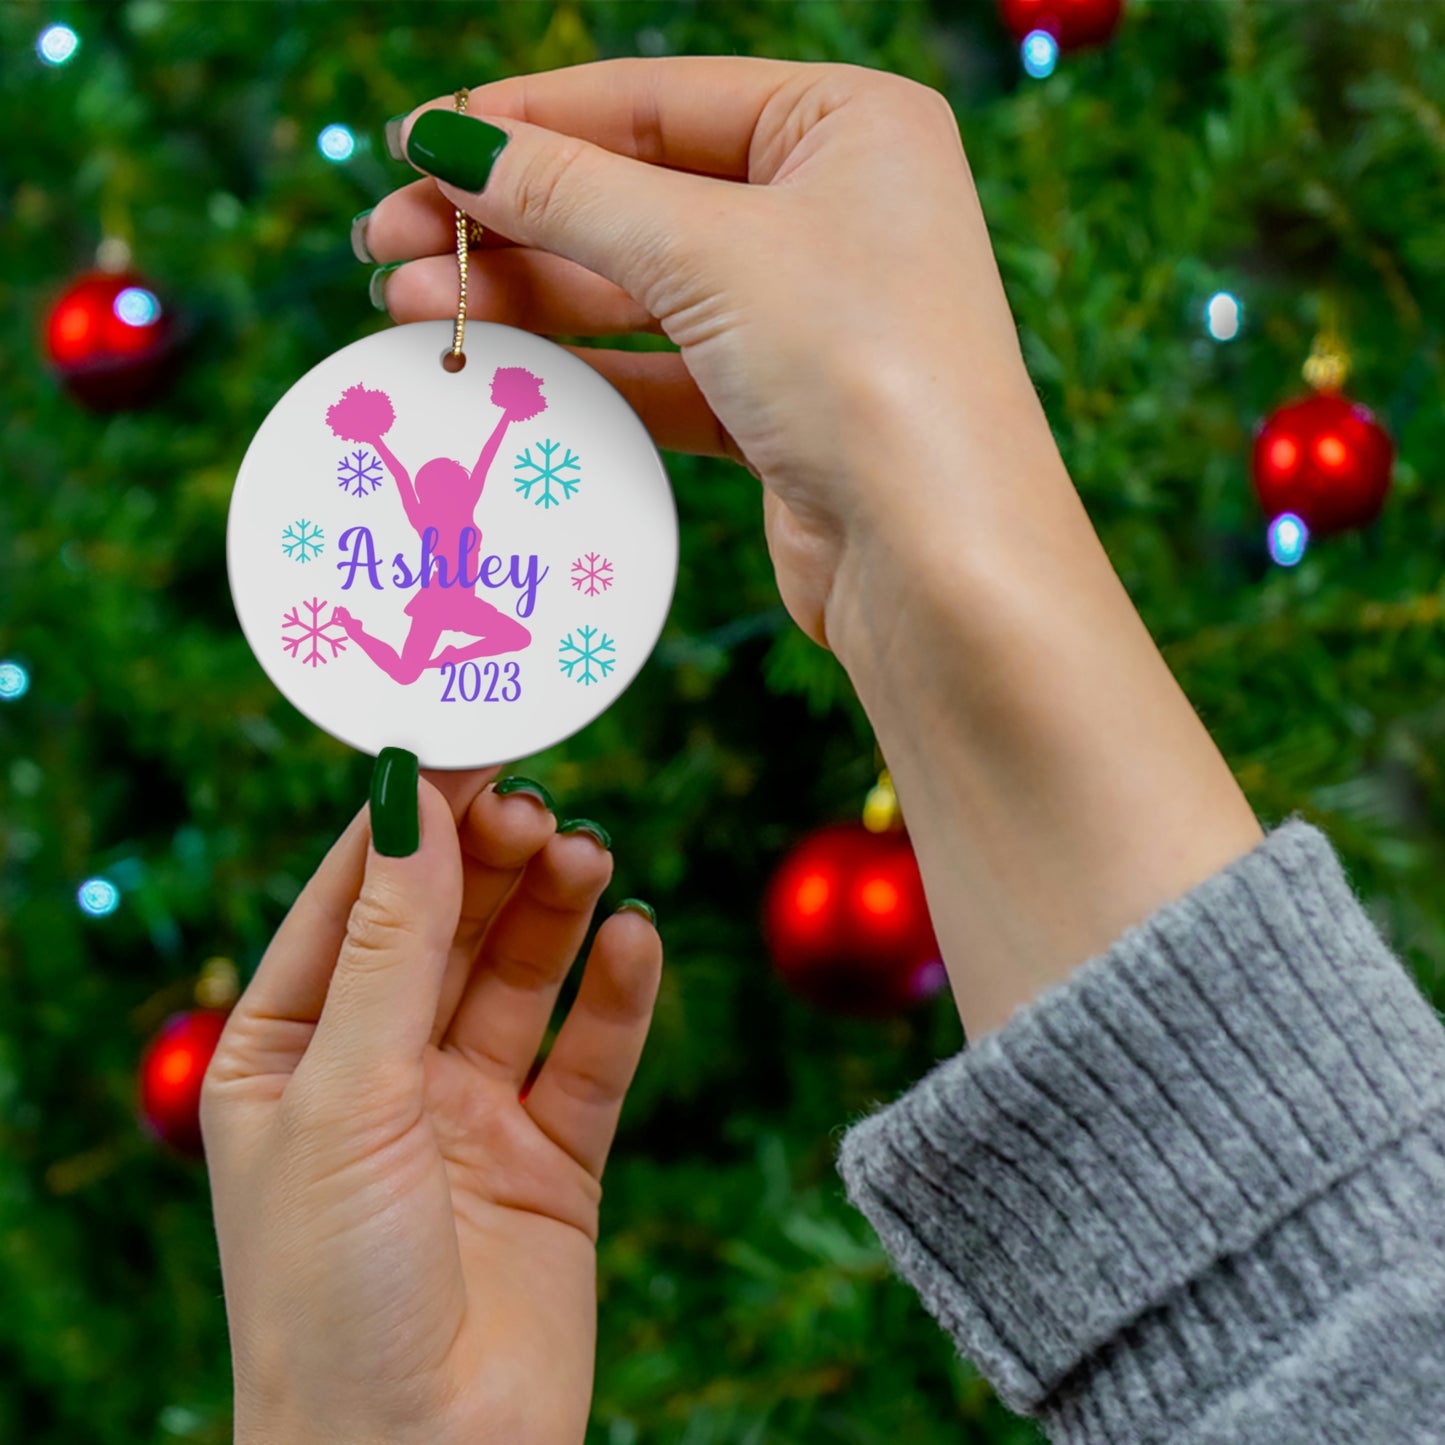 Personalized Cheer Ornament with Name and Year